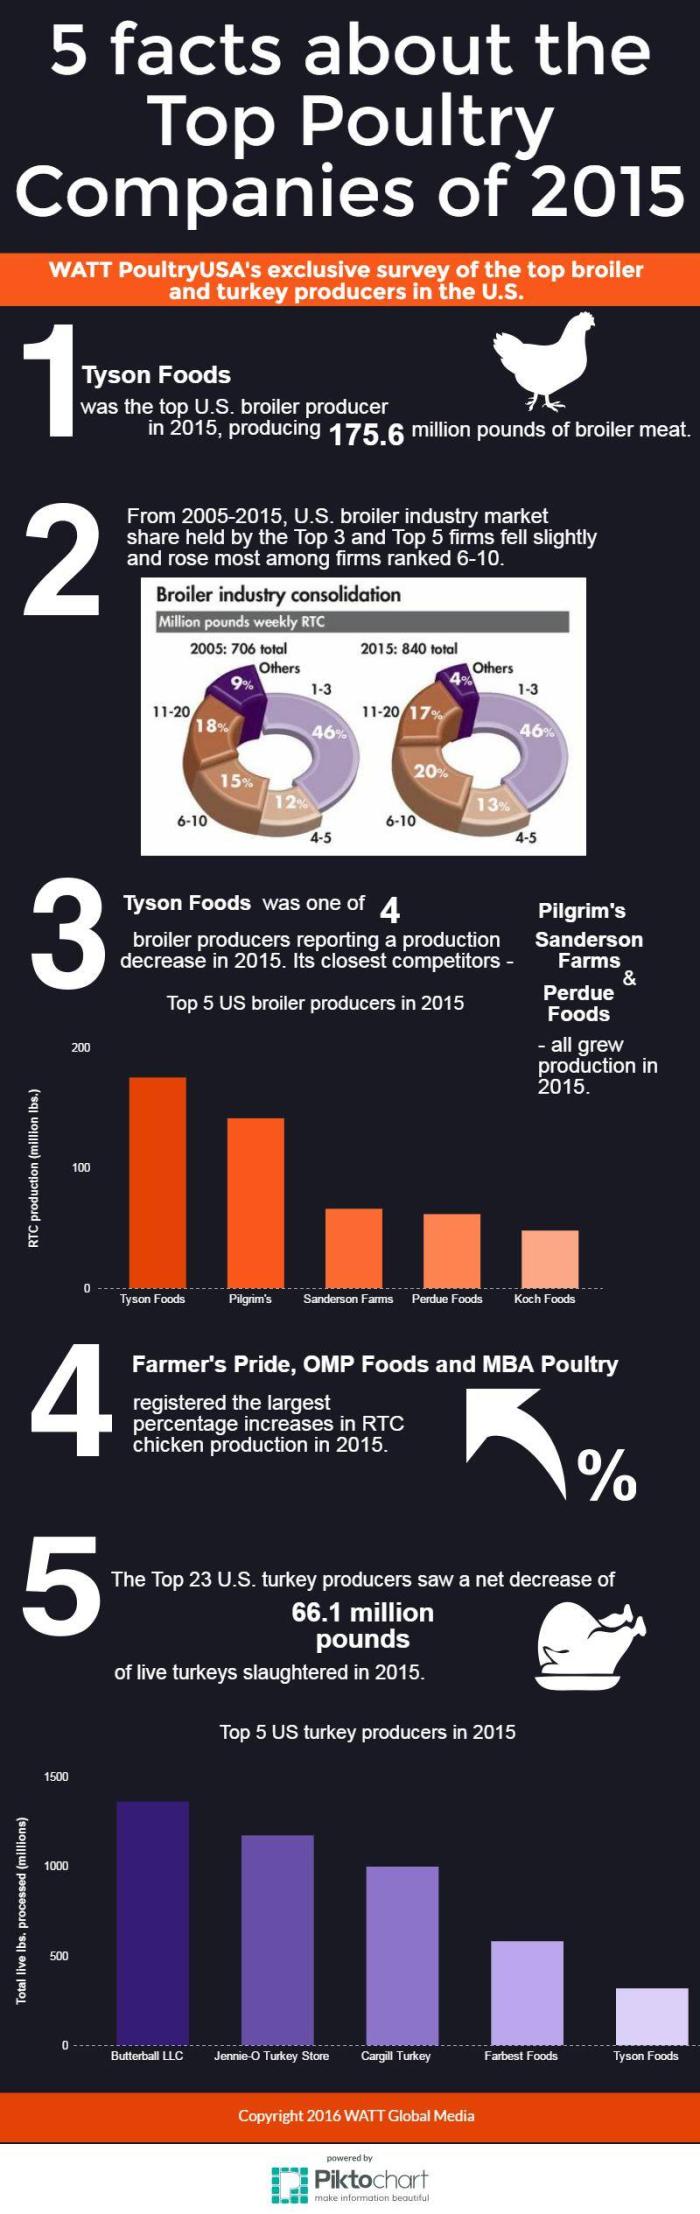 5-facts-about-the-top-poultry-companies-of-2015